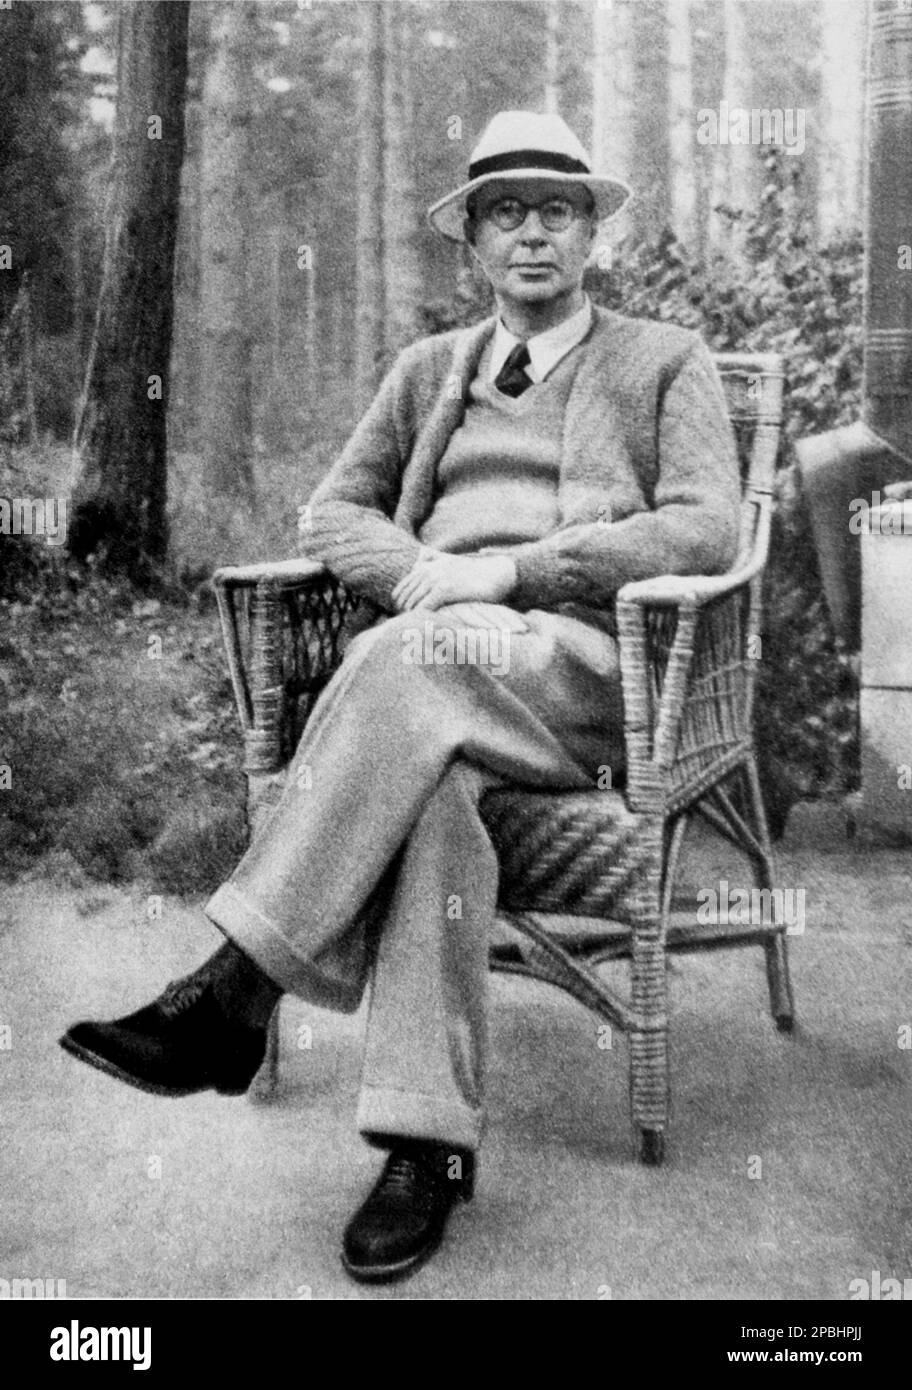 The russian music composer SERGEJ PROKOFIEV ( Sergej Sergeevic Prokof'ev,  1891 - 1953 ) , was a Russian composer who mastered numerous musical genres and came to be admired as one of the greatest composers of the 20th century - Sergej Sergejevic  Prokofjev , Sergei , Sergey or Serge  and Prokofief  Prokof'ev  Prokofiev  Prokoviev Prokofieff - BALLETS RUSSES by DIAGHILEV - Diagilev - COMPOSITORE - OPERA LIRICA - CLASSICA - CLASSICAL - PORTRAIT - RITRATTO - MUSICISTA - MUSICA  - pianist - pianista - AVANGUARDIA - AVANTGARDE - garden - giardino - vimini - rattan - cravatta - tie - cappello - hat Stock Photo